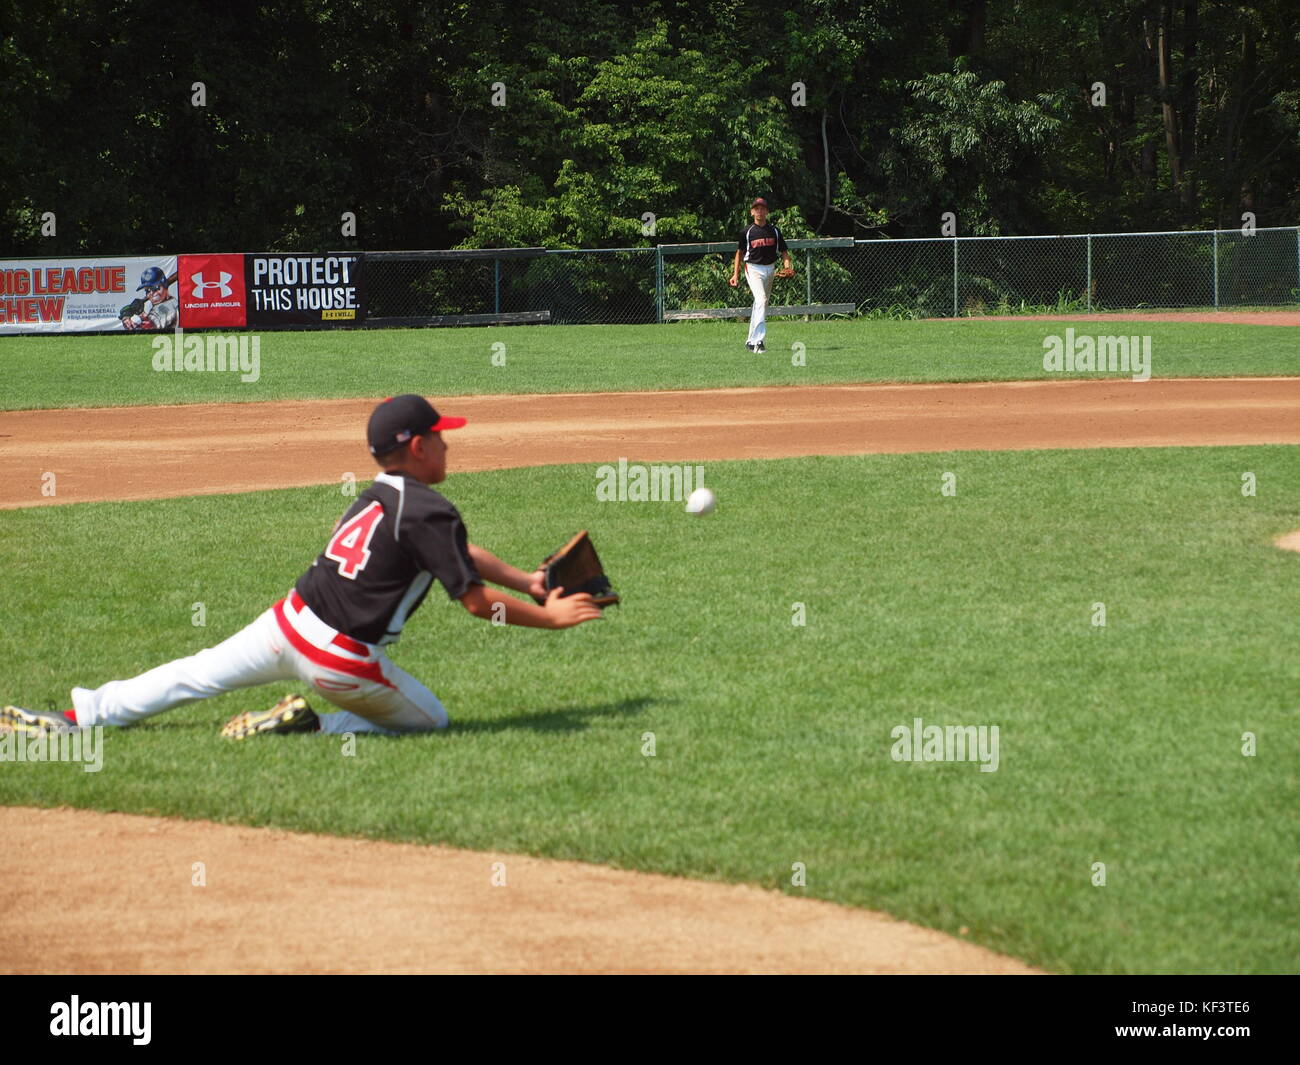 Youth baseball player attempting to field a baseball and ultimately falls. Stock Photo